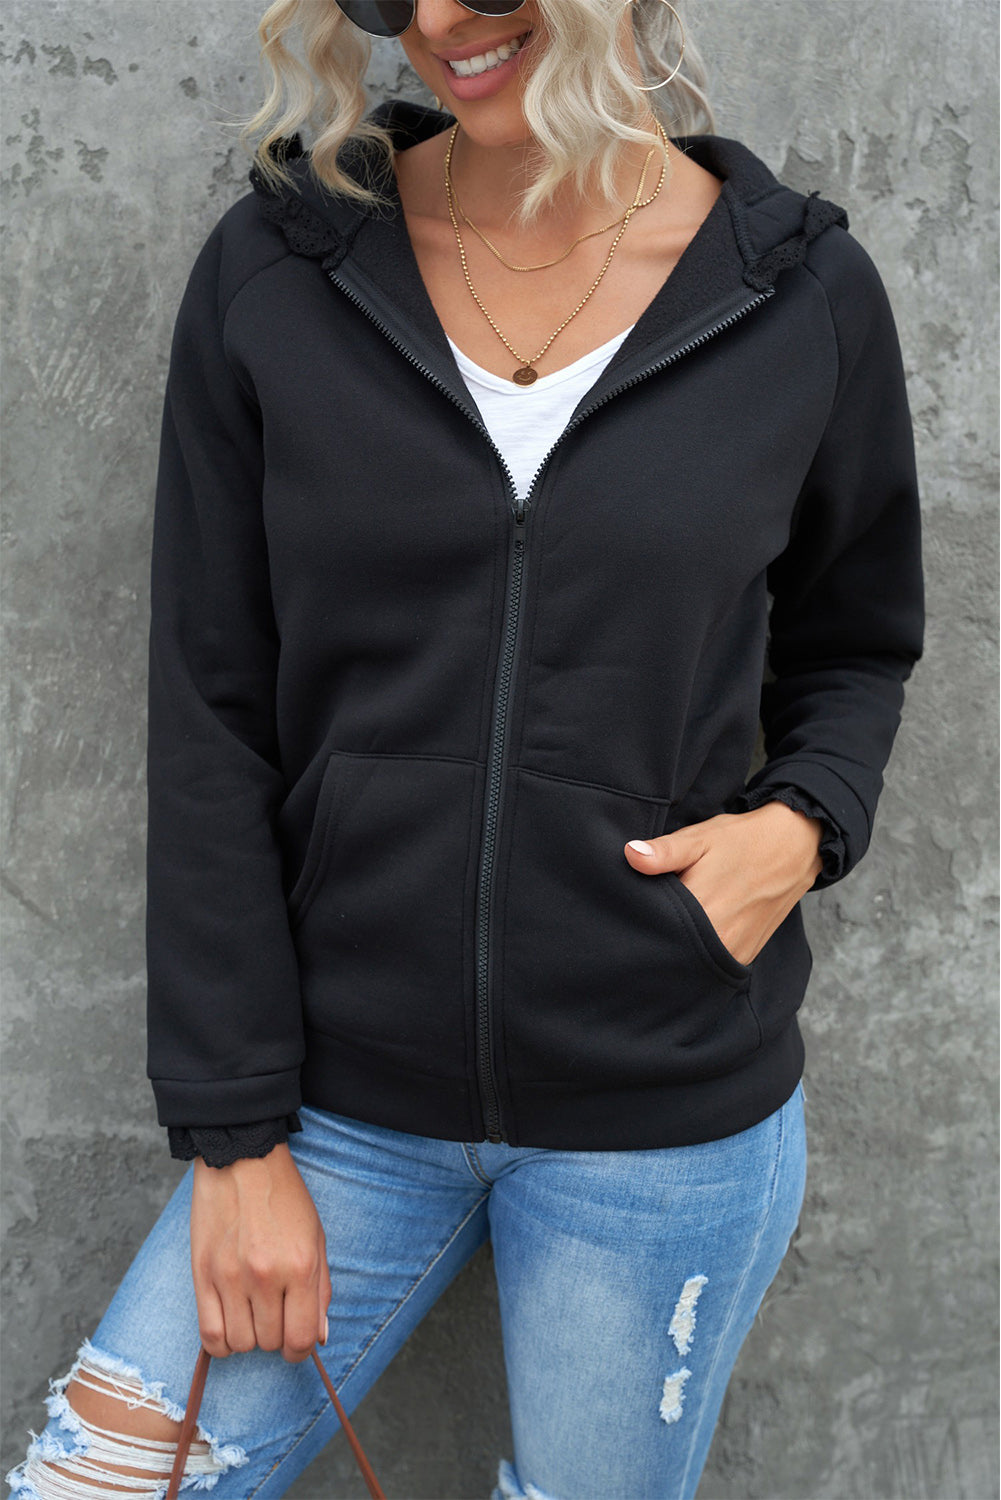 Lace Trim Zip-Up Hooded Jacket- ONLINE ONLY 2-10 DAY SHIPPING